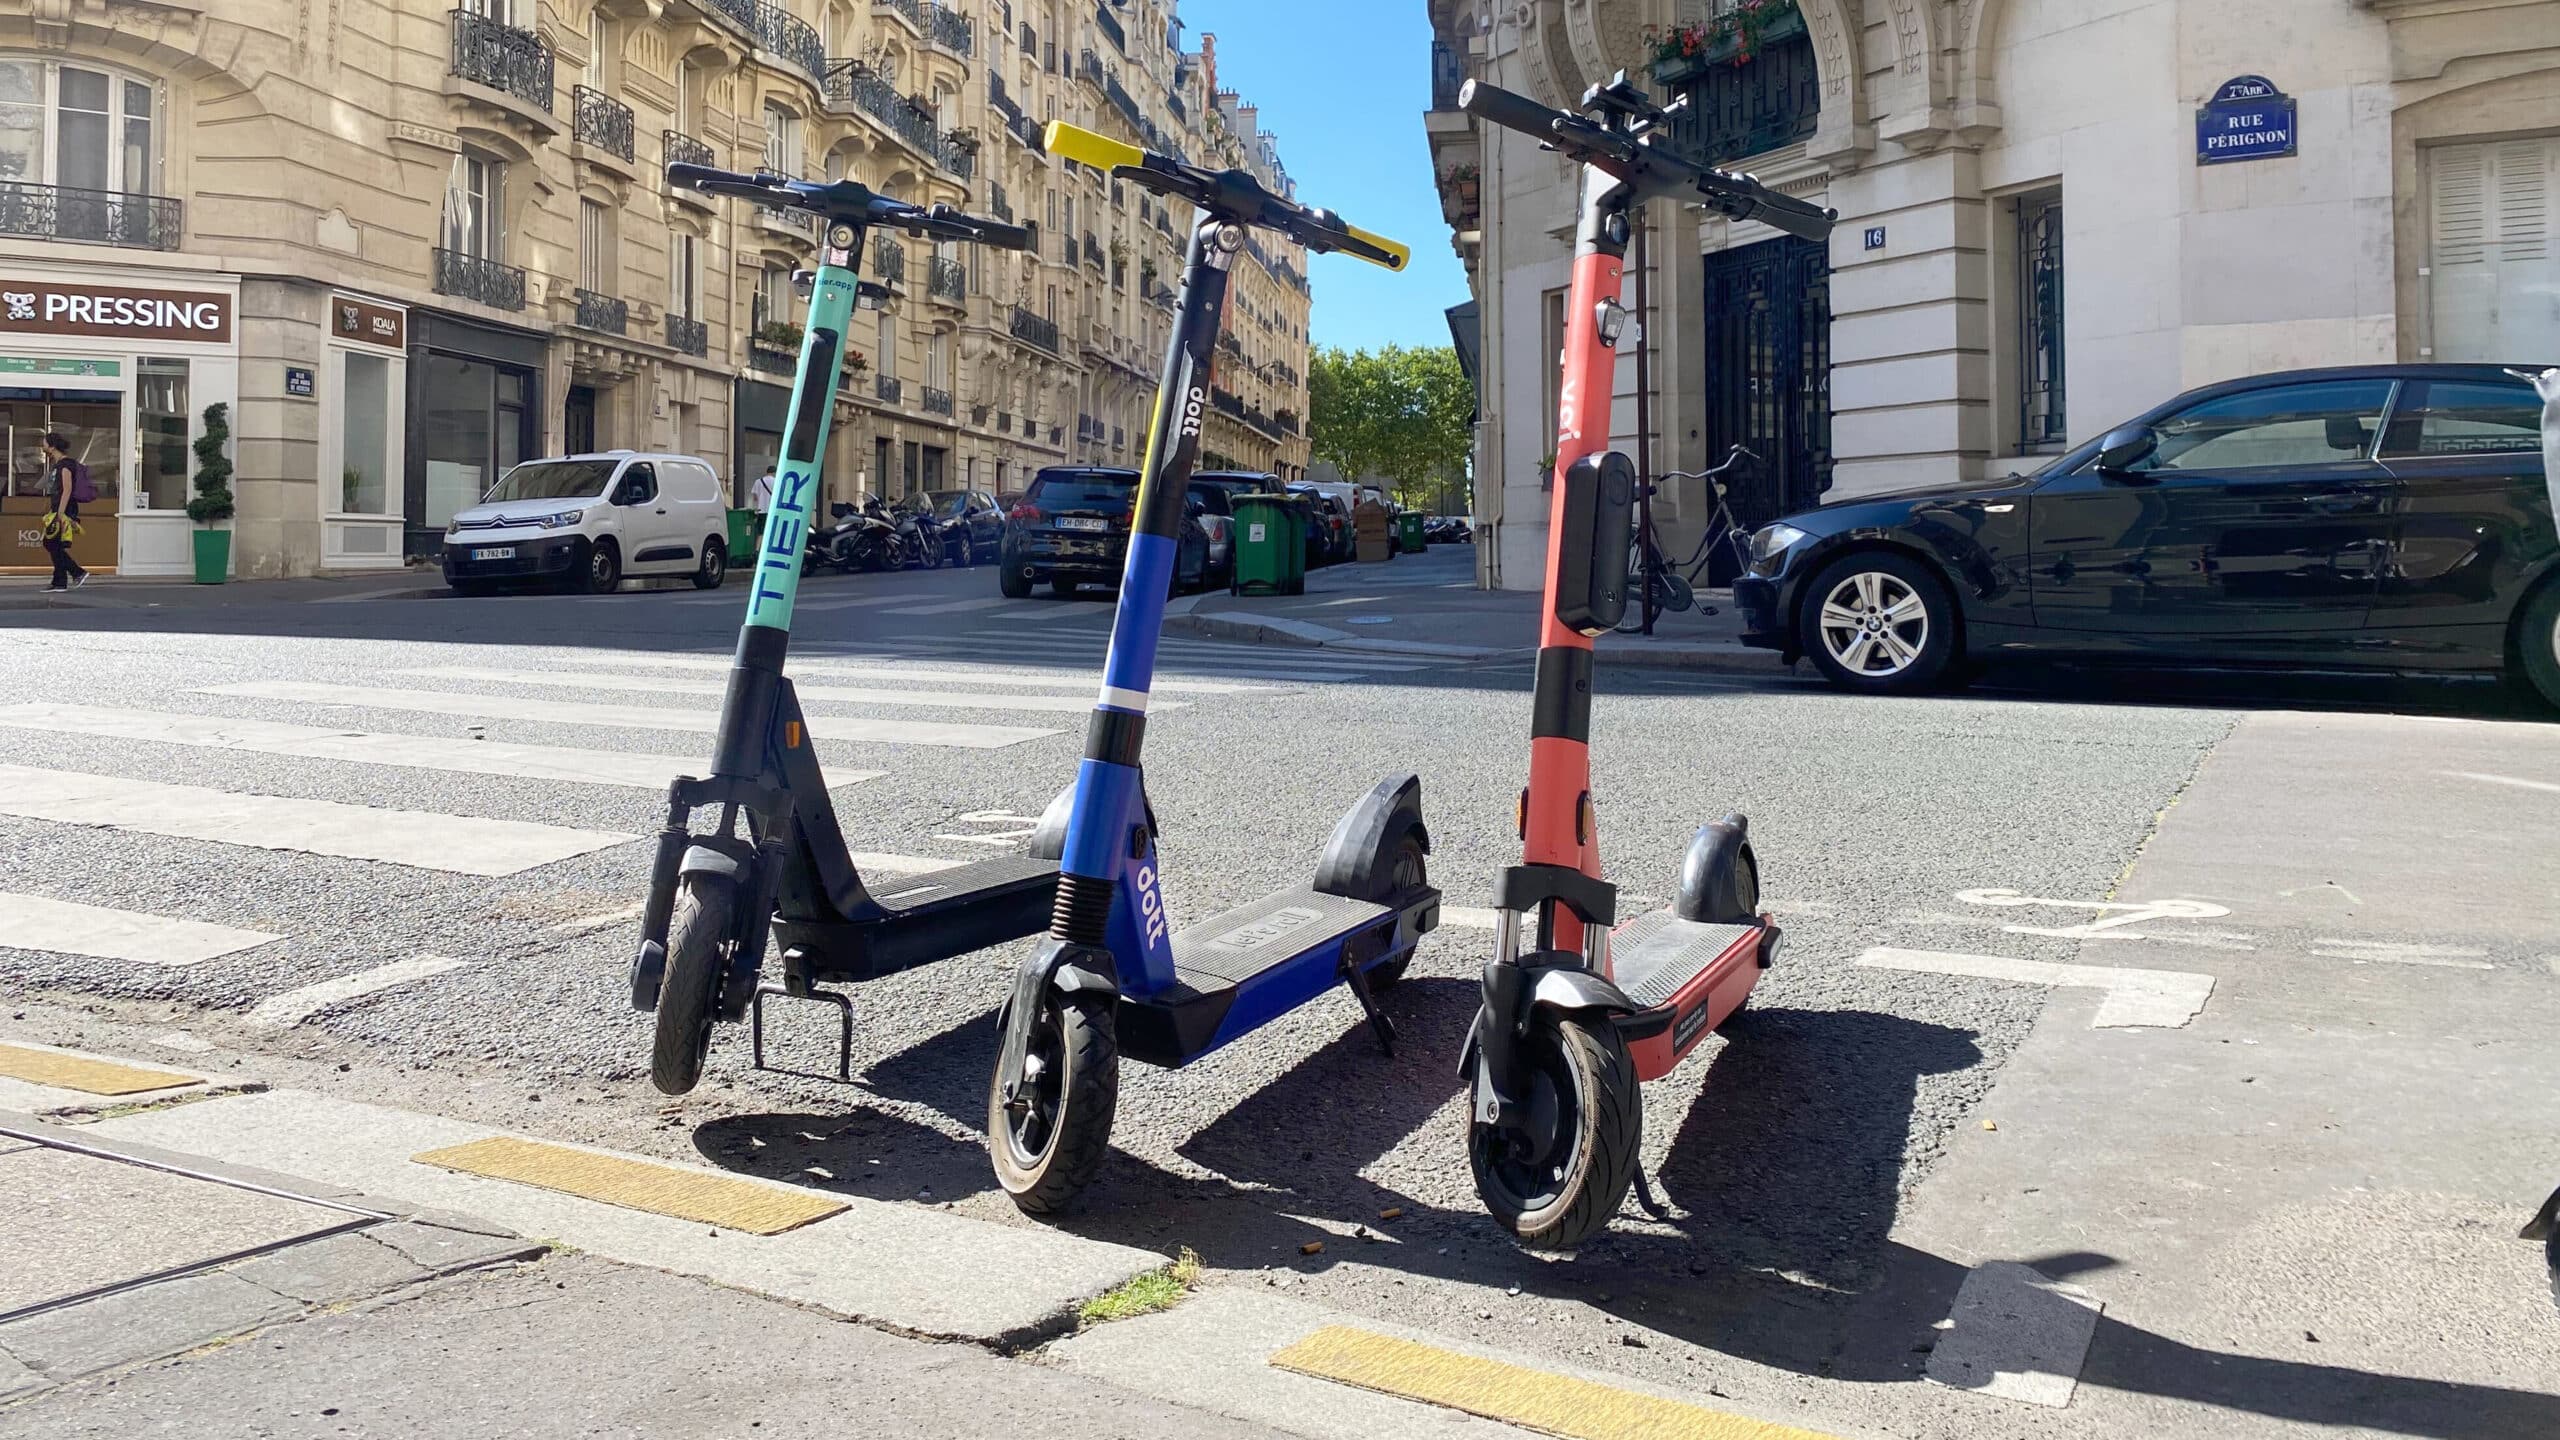 A Tier e-scooter, a Dott e-scooter and a Voi e-scooter are all parked in a line on a street in France, the weather is sunny.